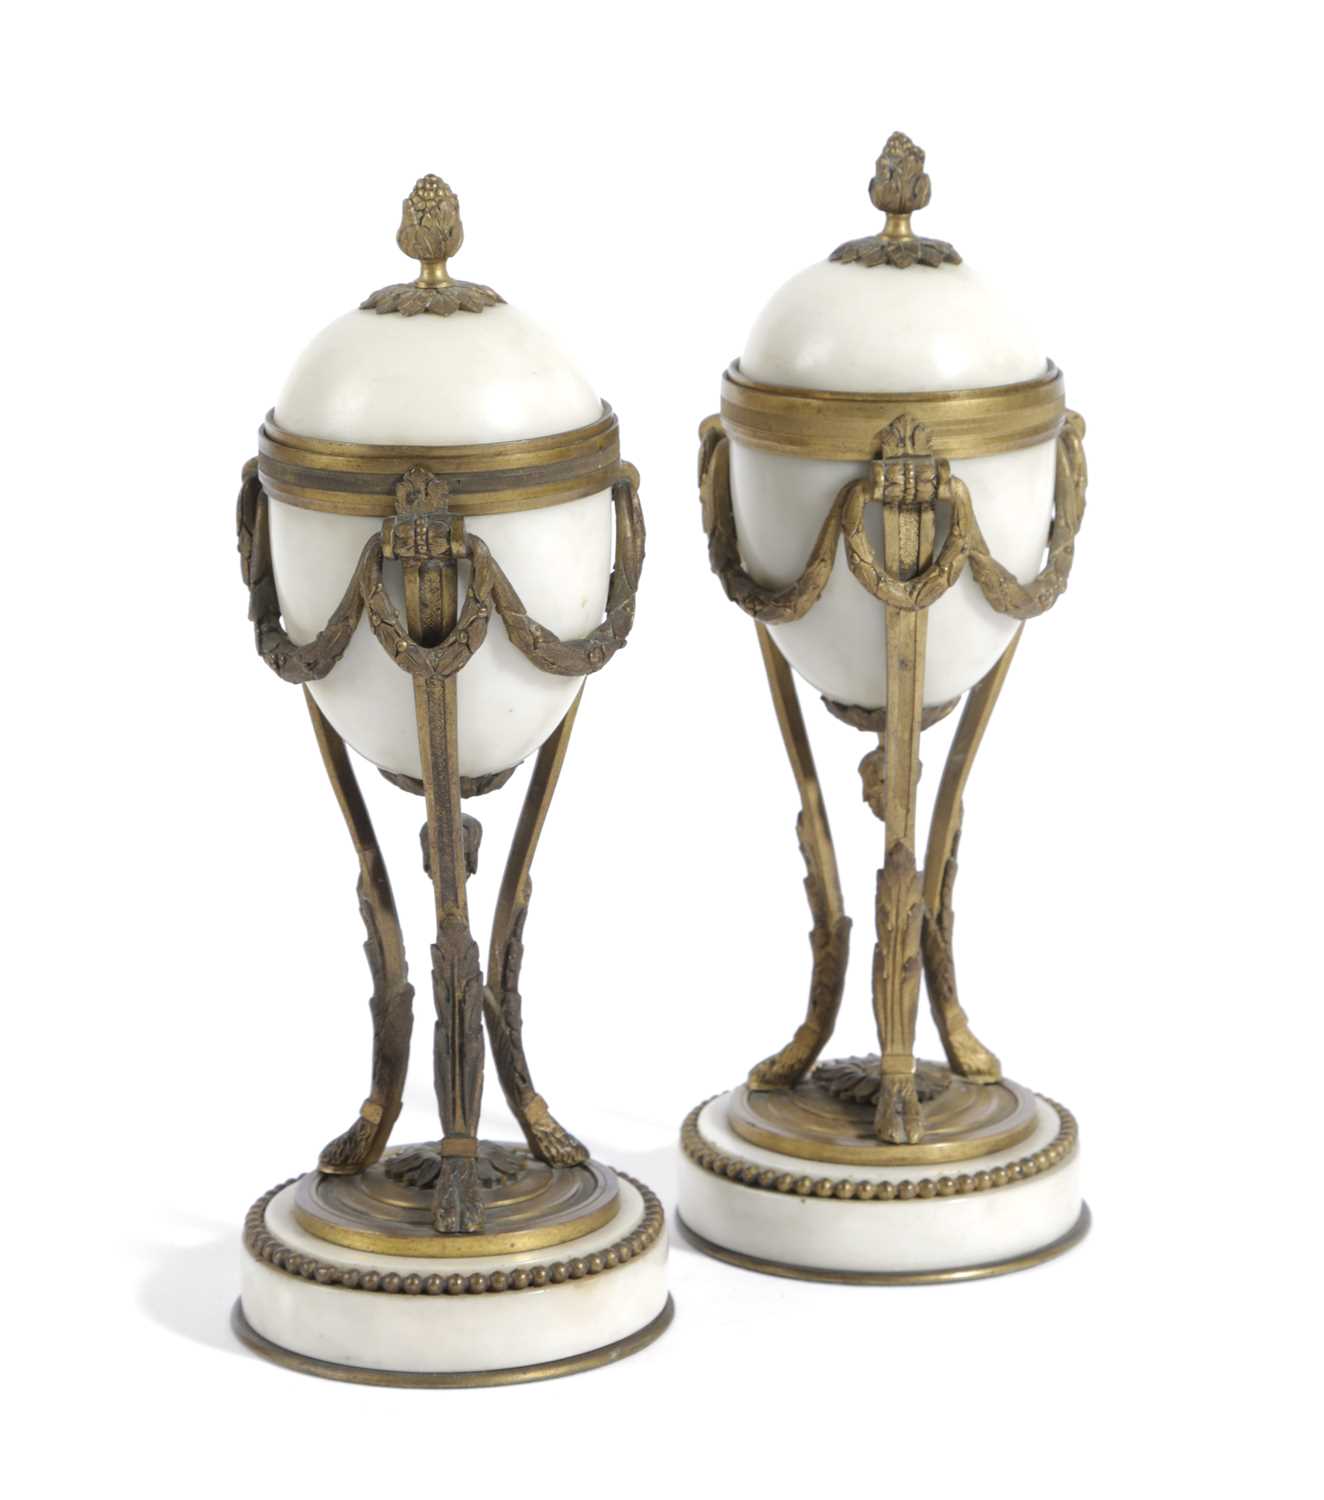 A PAIR OF FRENCH ORMOLU AND WHITE MARBLE CASSOLETTES IN LOUIS XVI STYLE, LATE 19TH CENTURY each with